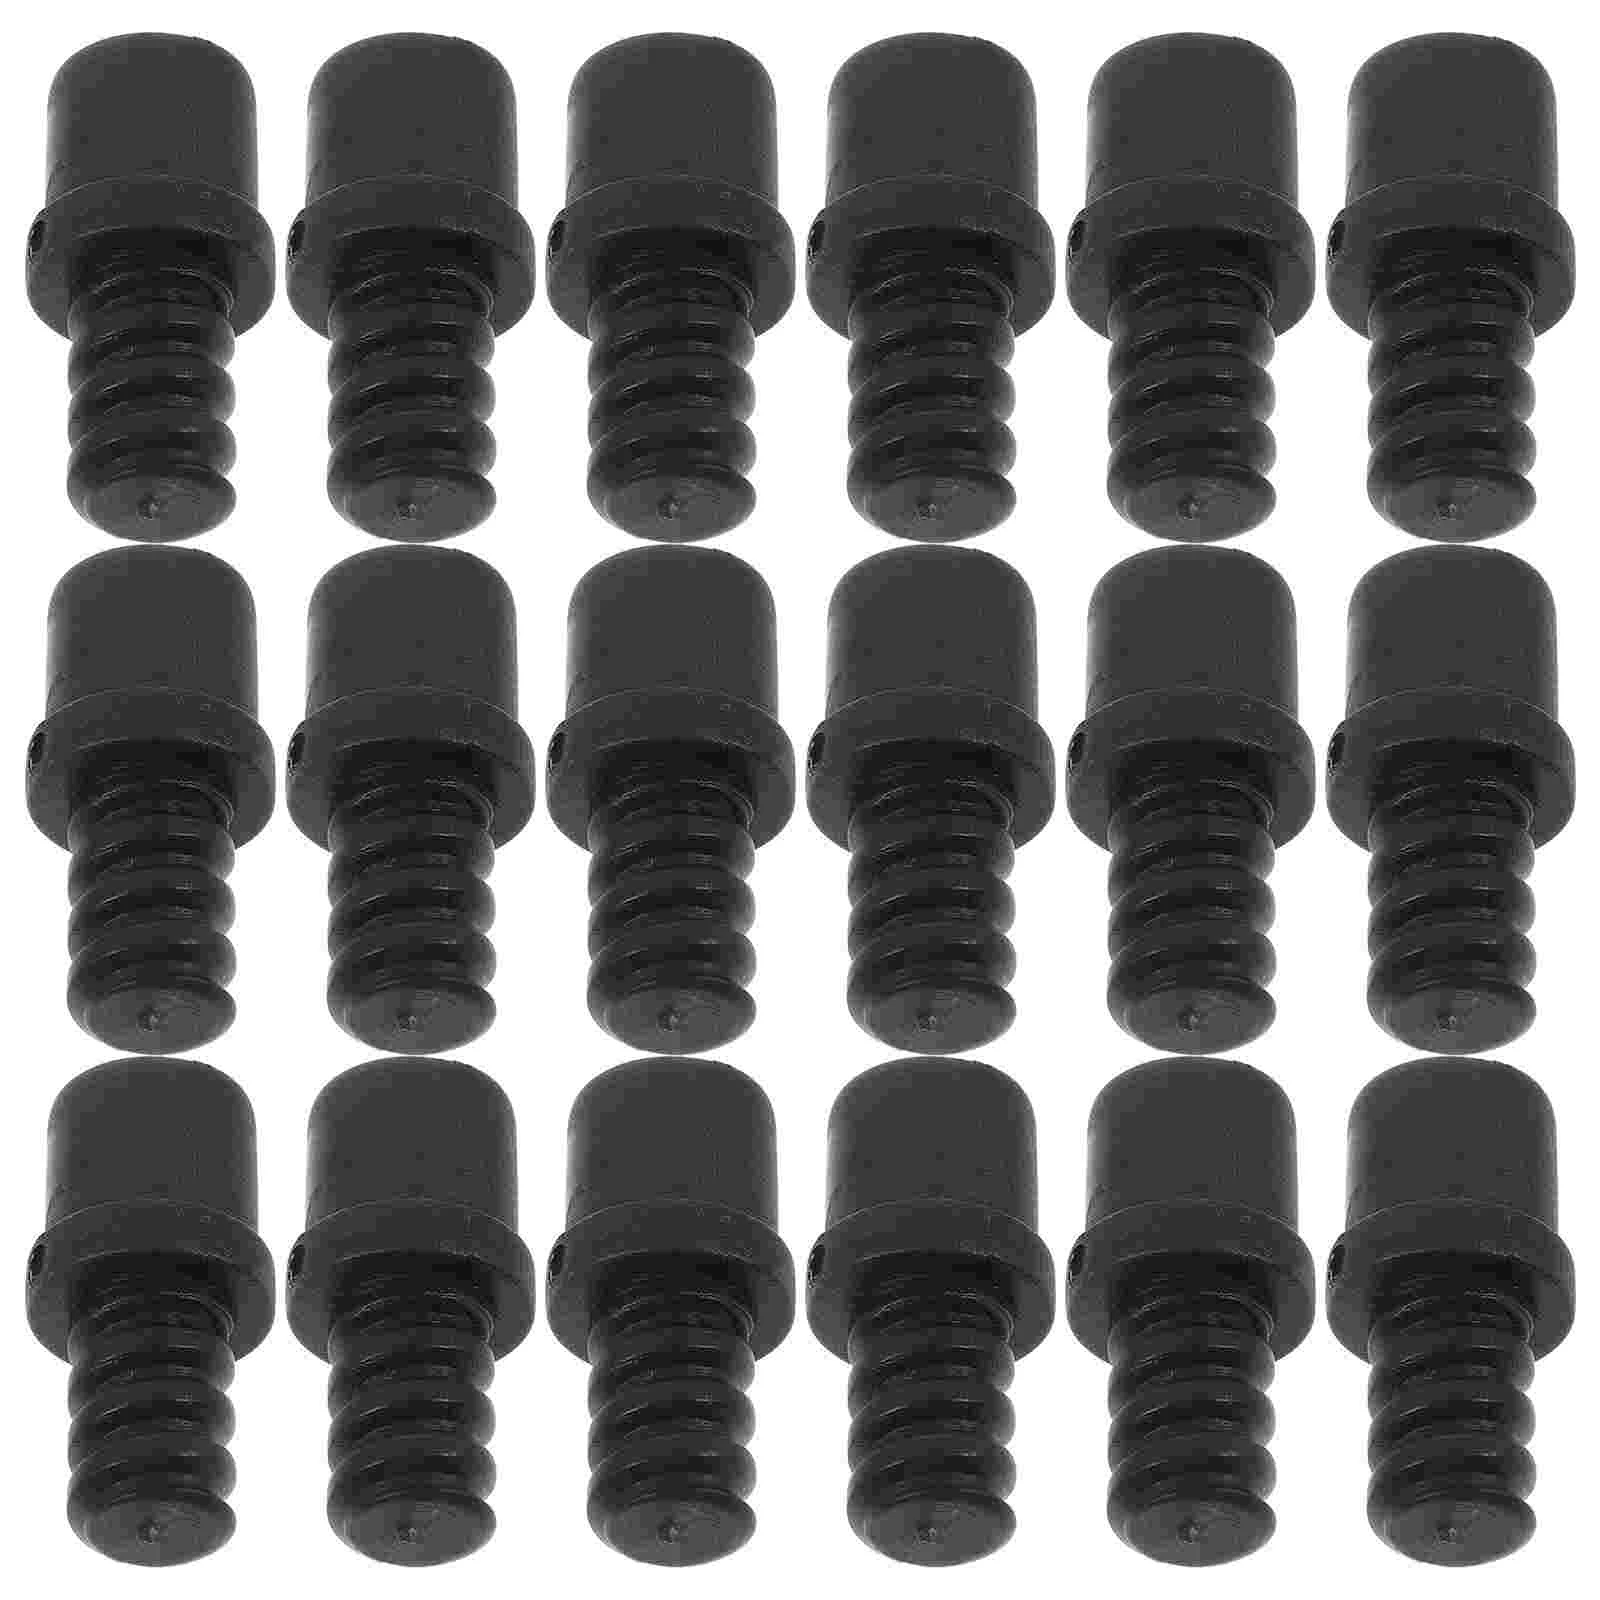 

20 Pcs Brush Handle Connector Toilet Pole Repair Kit Component Supplies Plastic Threaded Tip For Tips